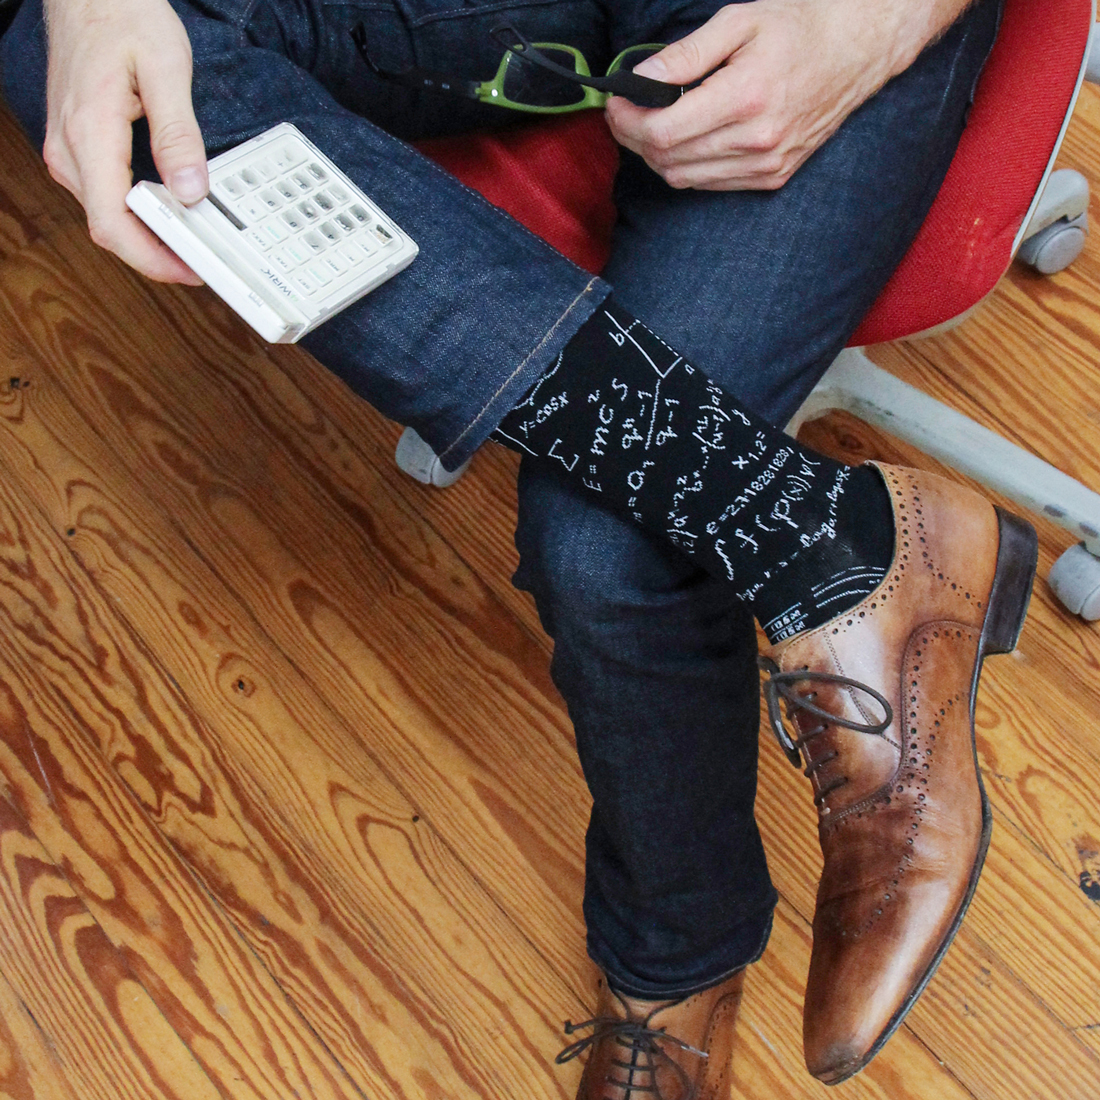 Photo of a man sitting in a red chair holding a calculator and green reading glasses with black socks that have random math equations scattered on them in white.